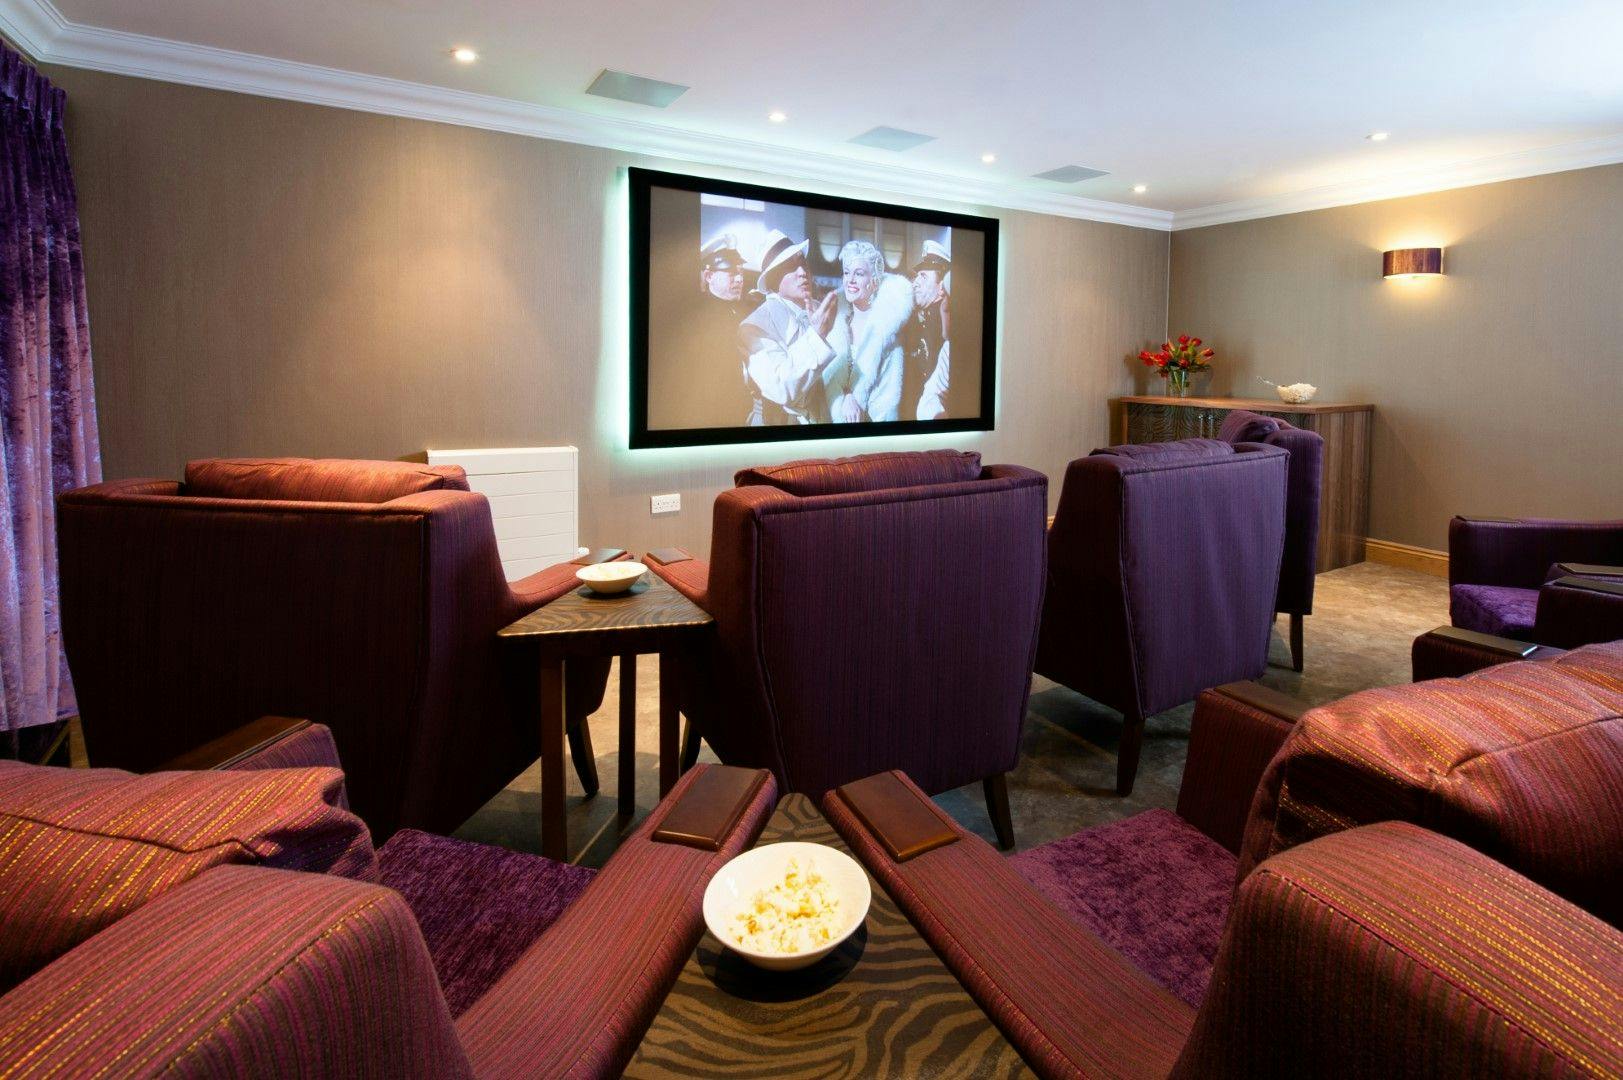 Cinema at Kew House Care Home in Kingston upon Thames, Greater London 